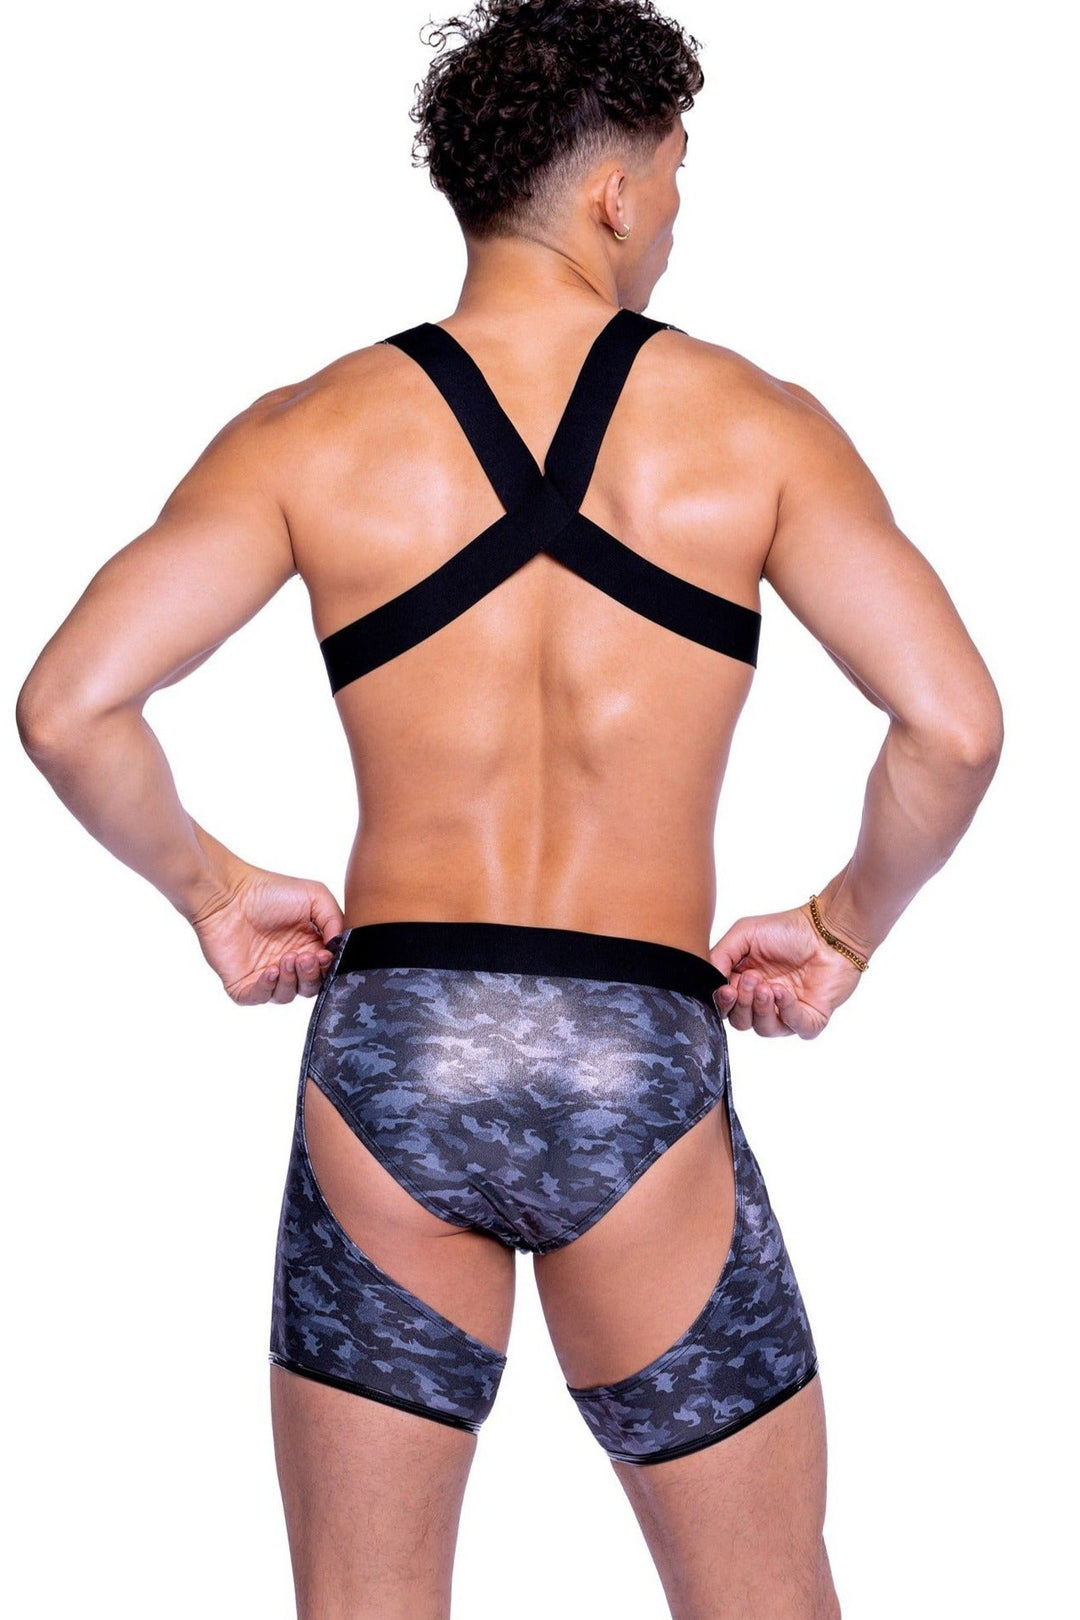 Shimmer Camouflage Chaps with Stud Detail